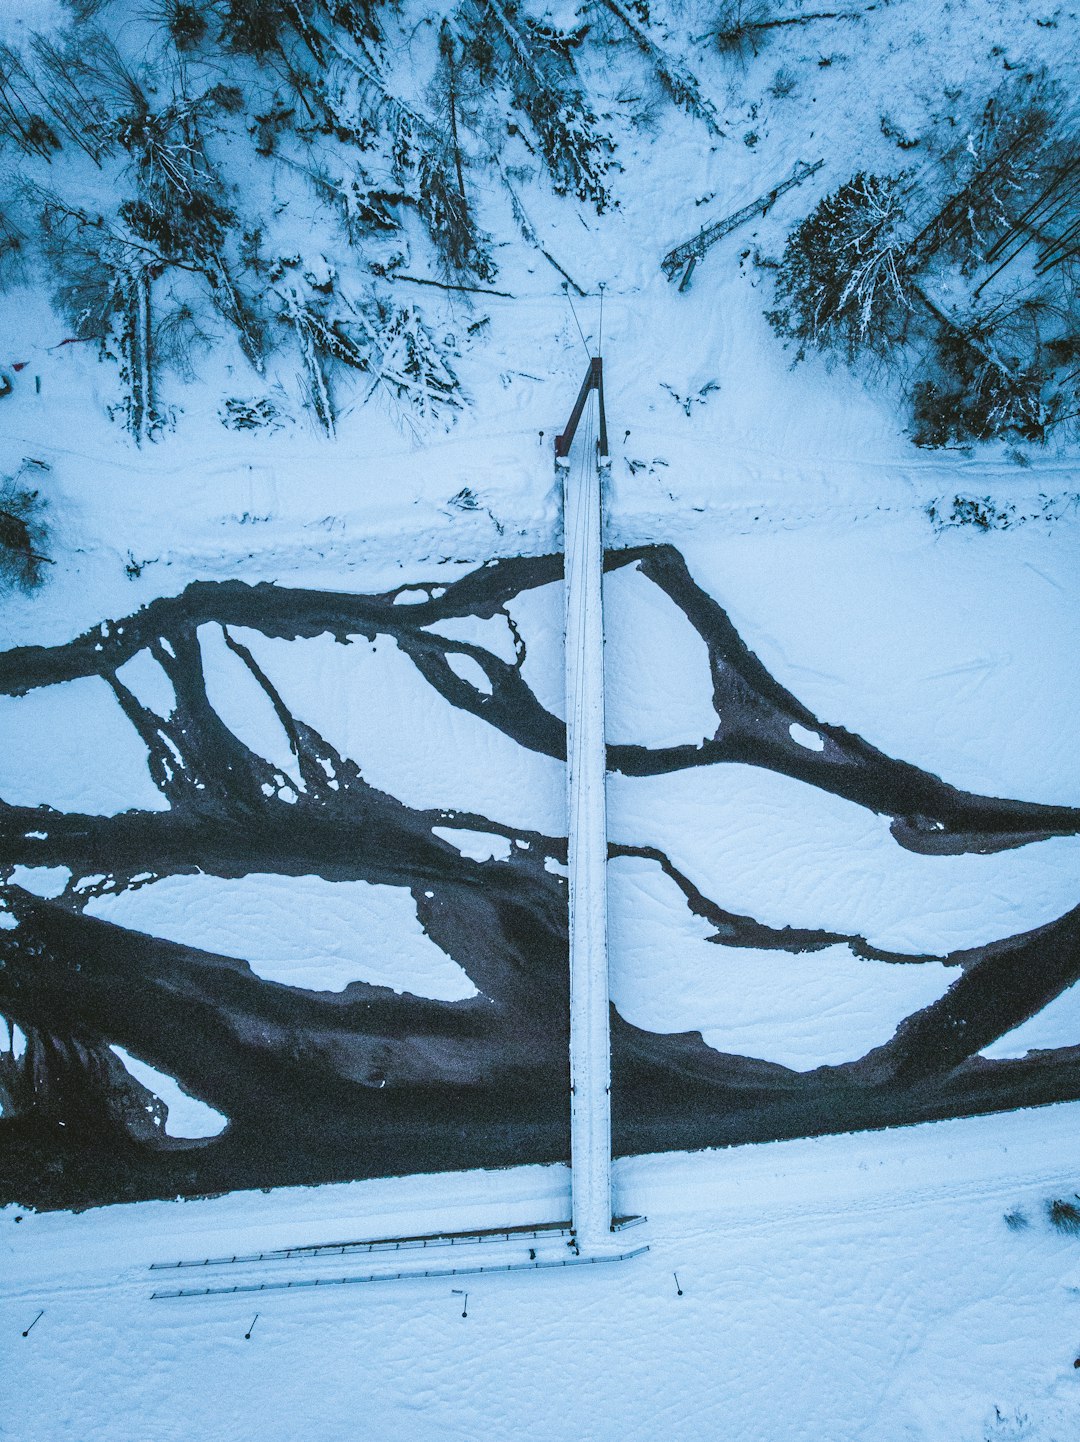 black tree trunk on snow covered ground